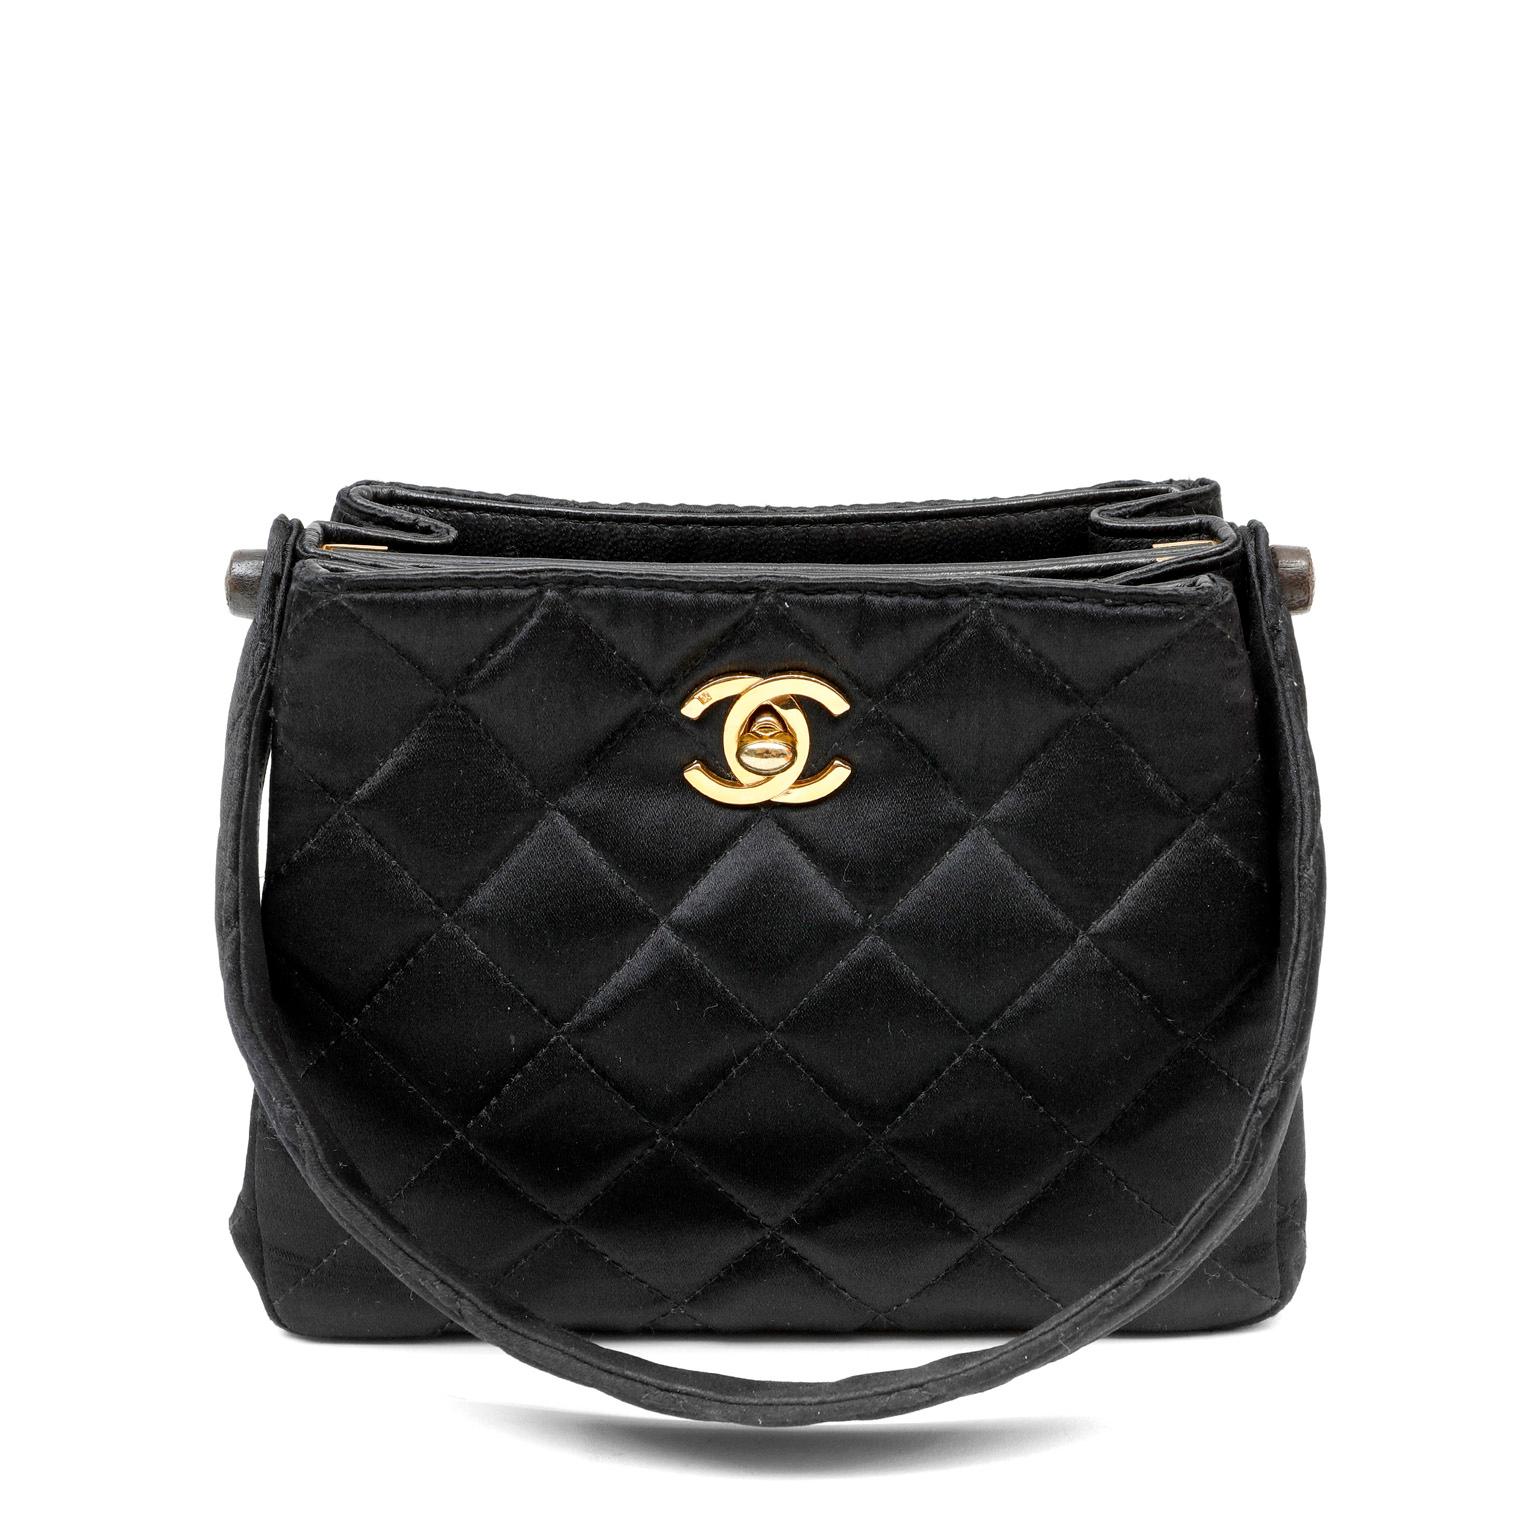 This authentic Chanel Black Satin Double Sided Evening Bag is in beautiful vintage condition.  Rare and collectible, this unique piece features shiny black quilted satin and gold interlocking CC hardware.  Single top handle carry. Dust bag